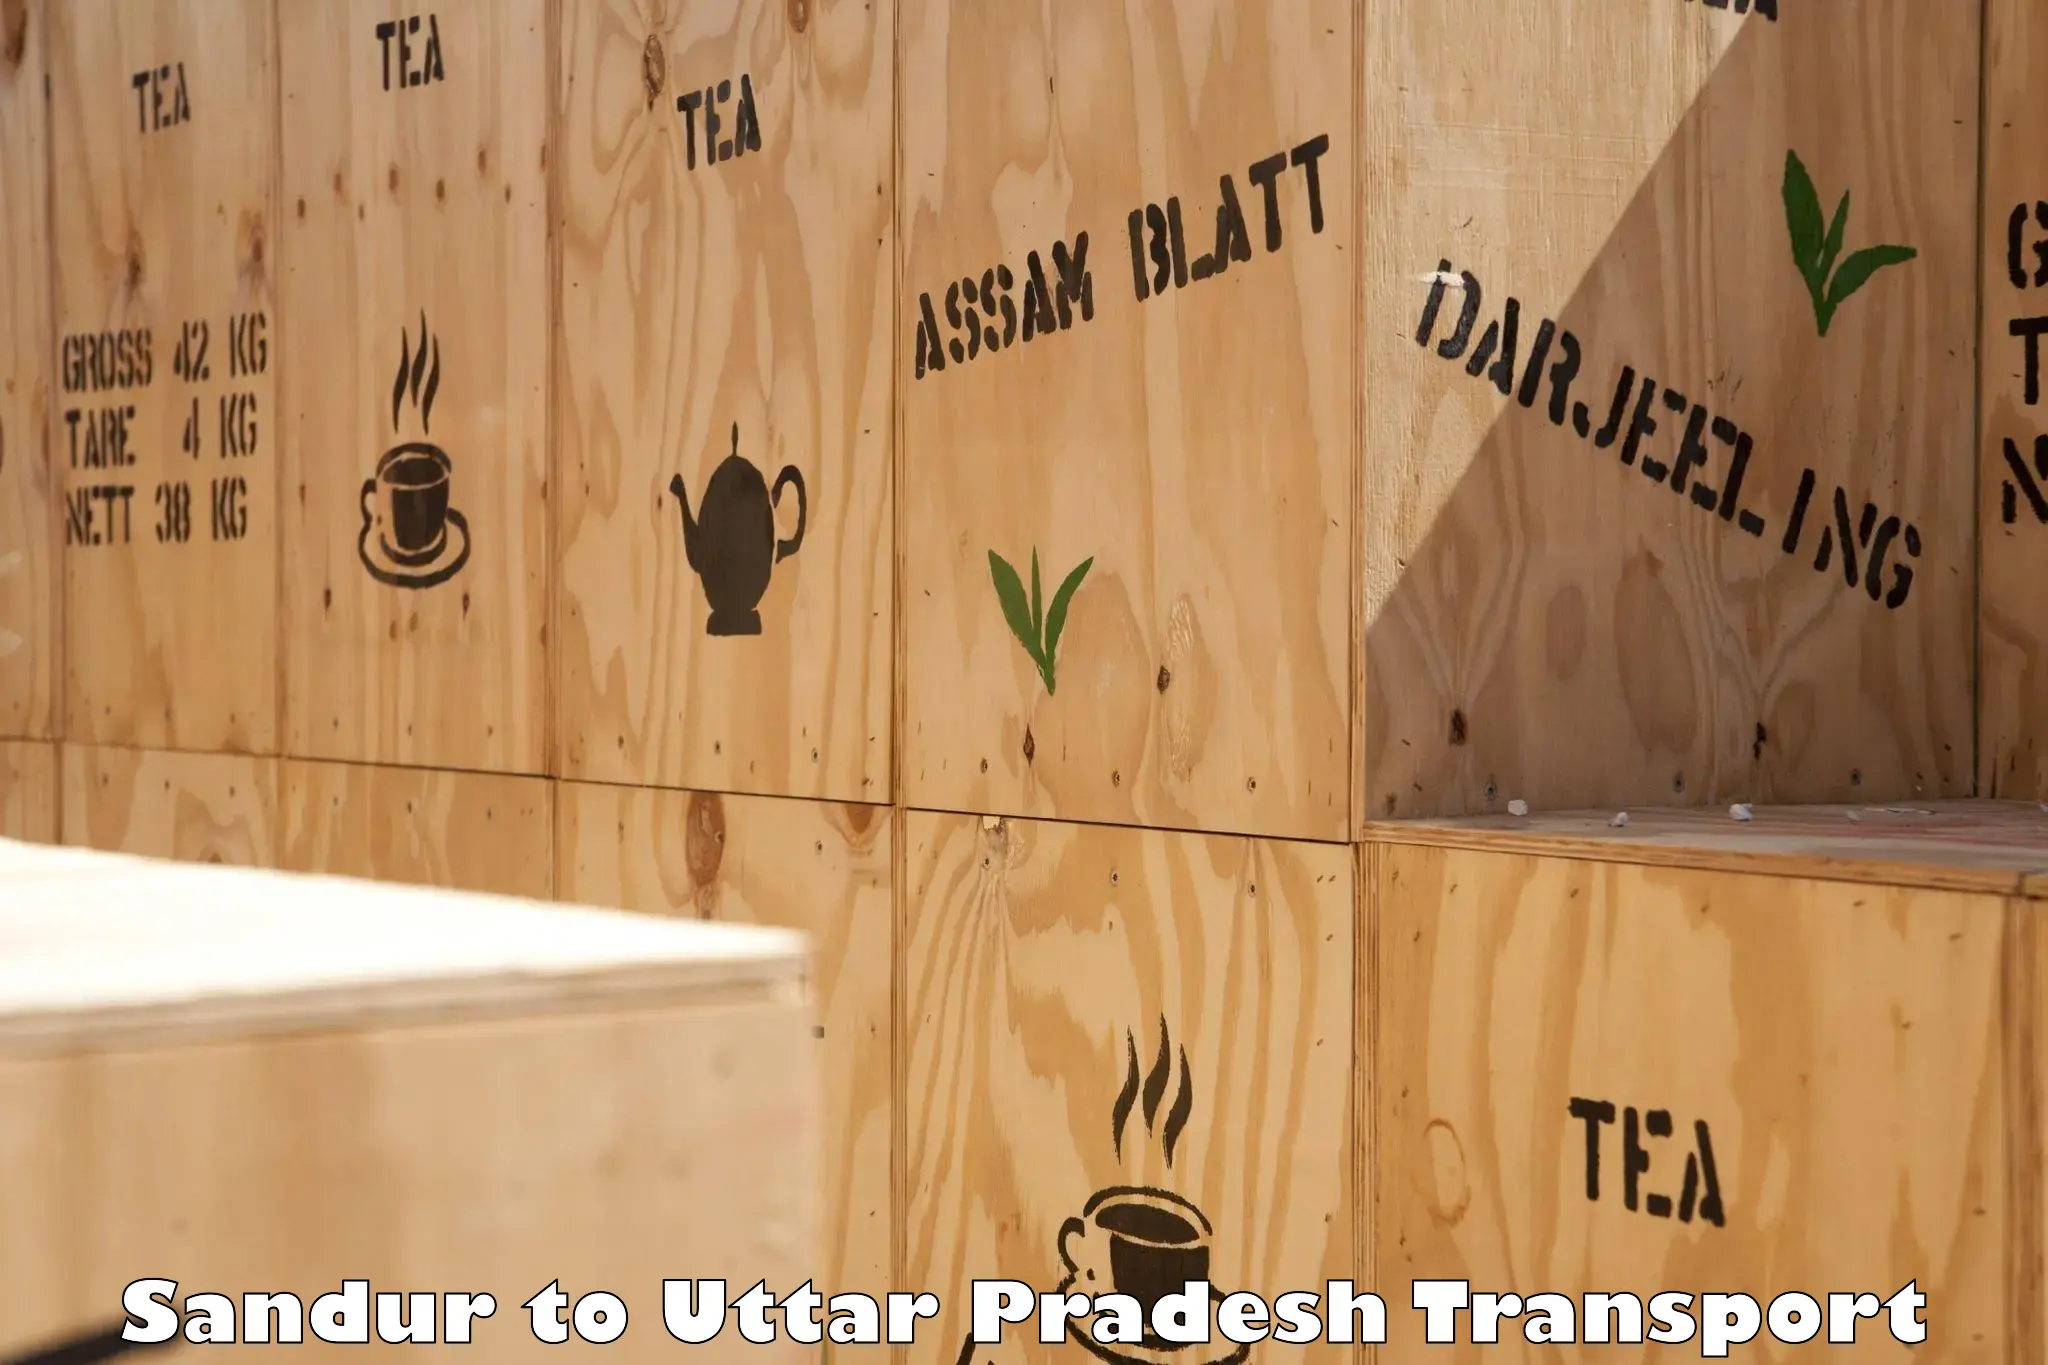 Container transportation services Sandur to Lucknow